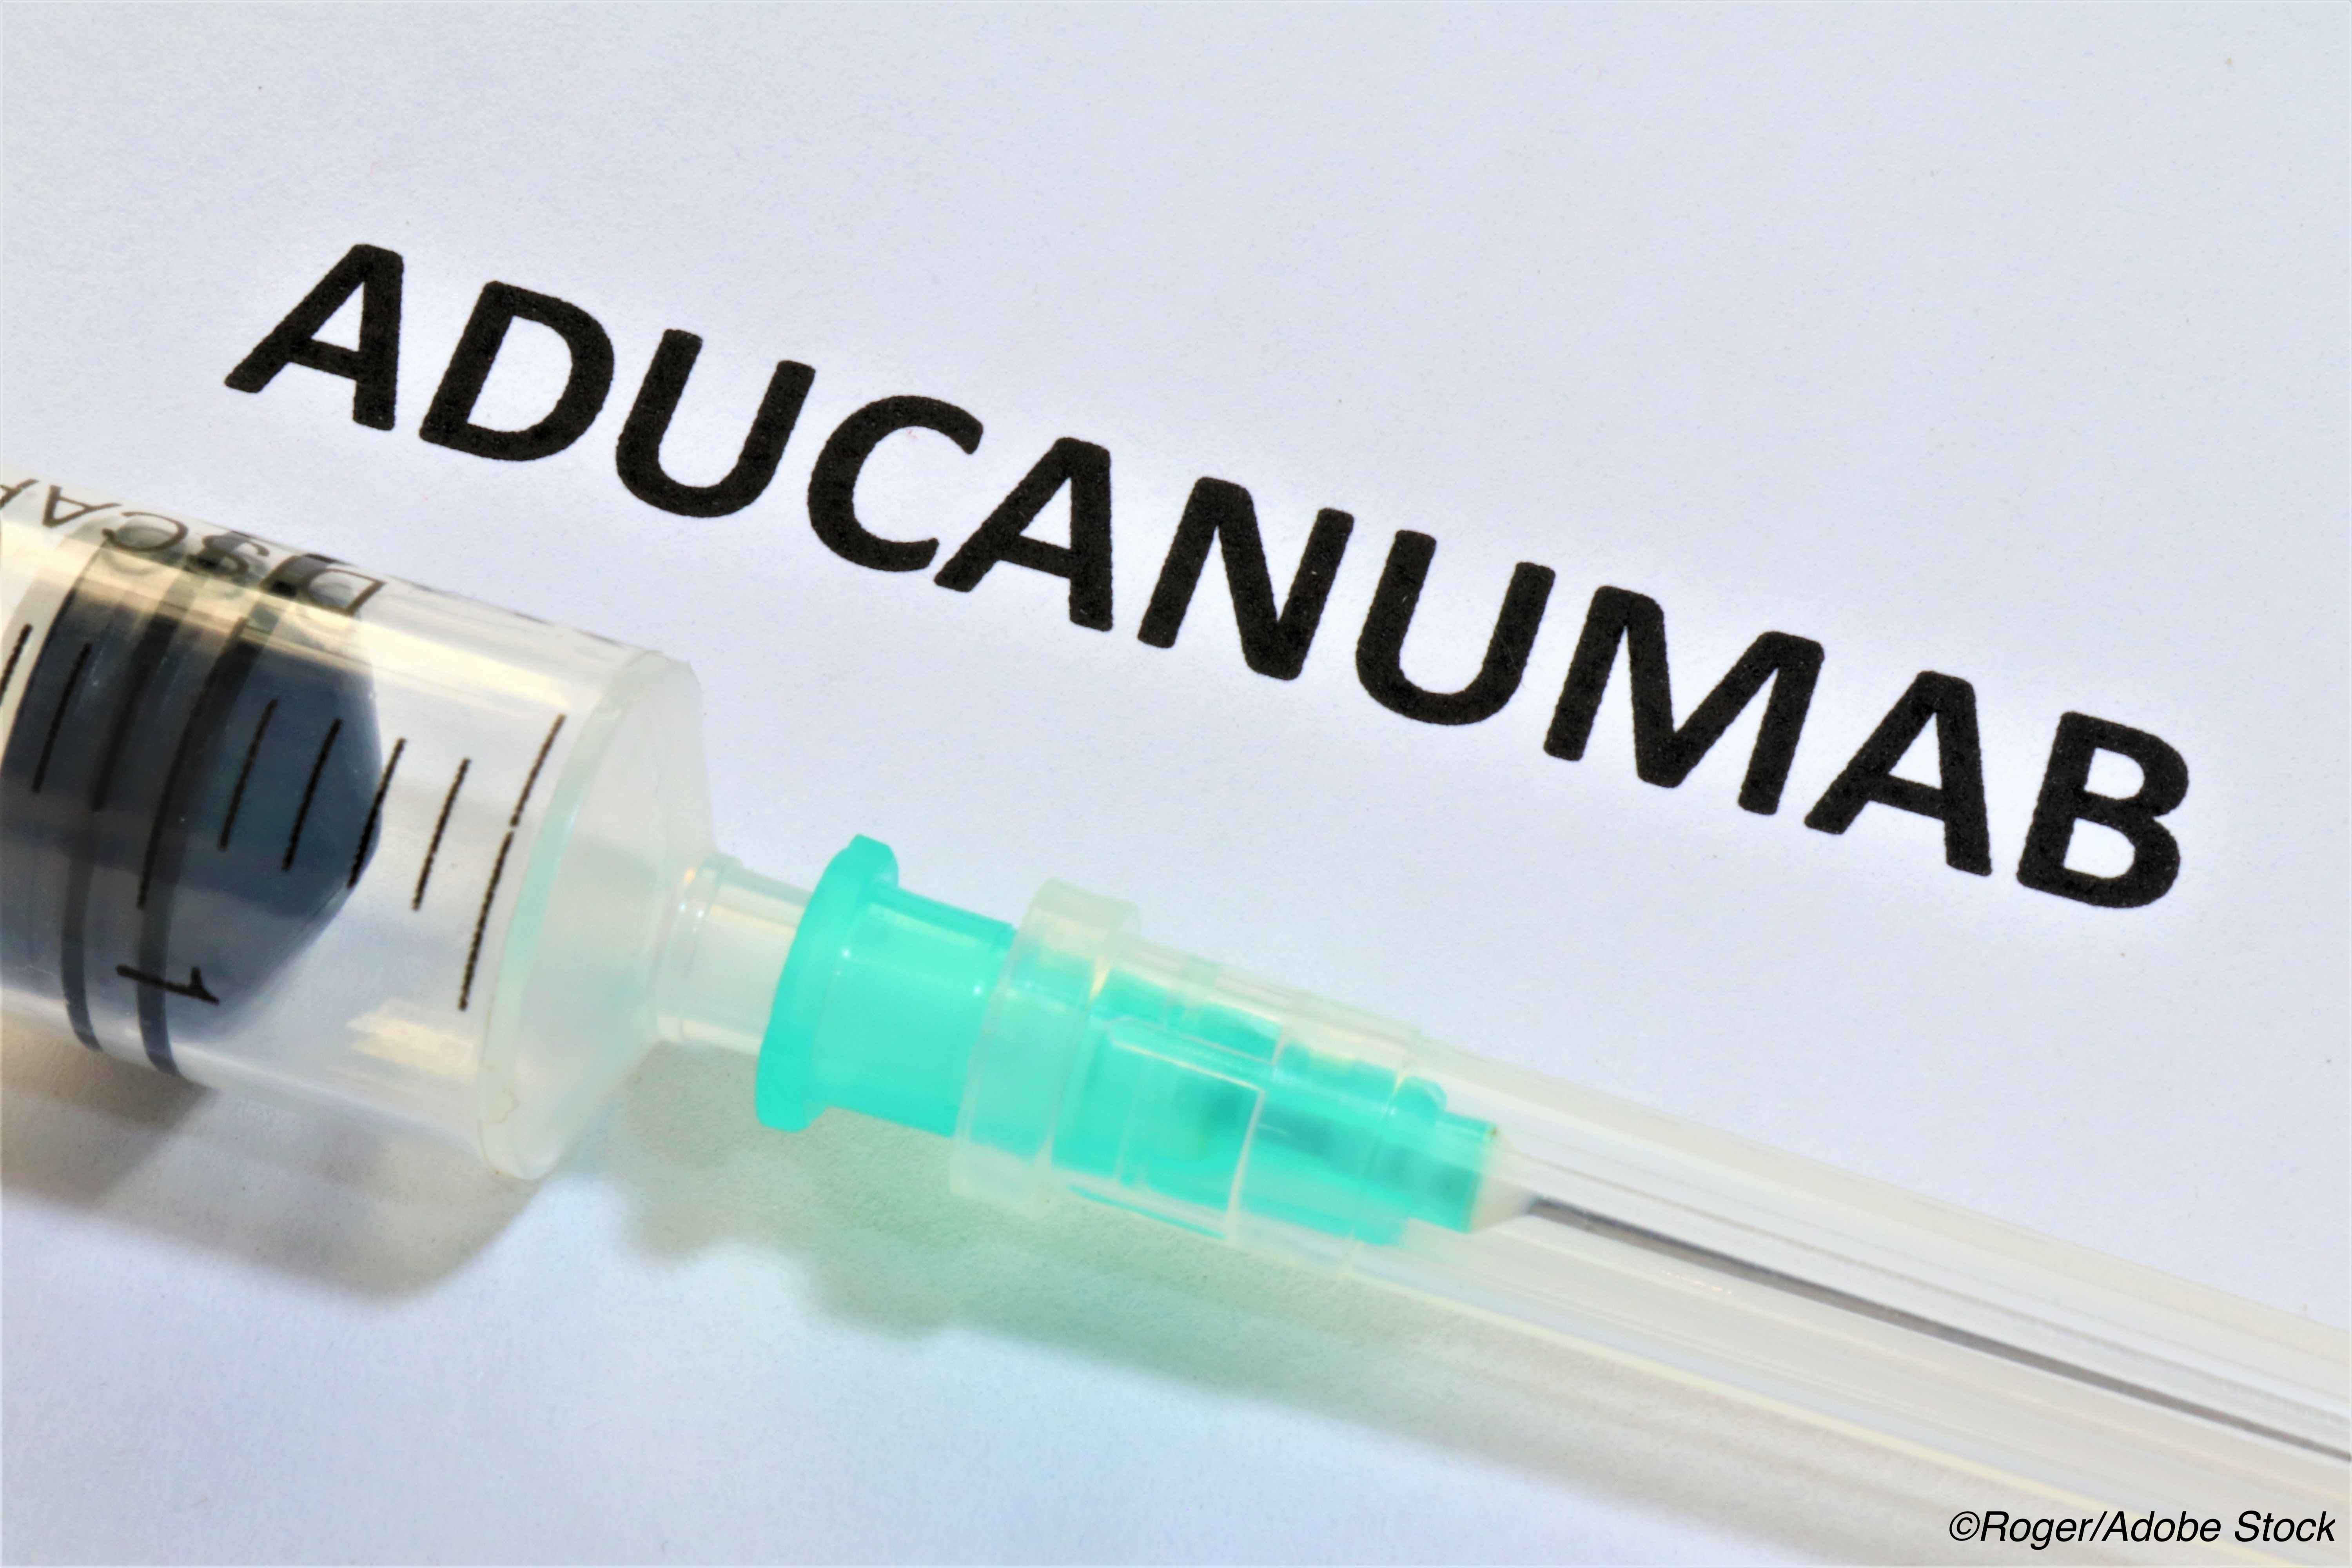 FDA Advisory Committee Member Outlines the ’Problem’ with Aducanumab